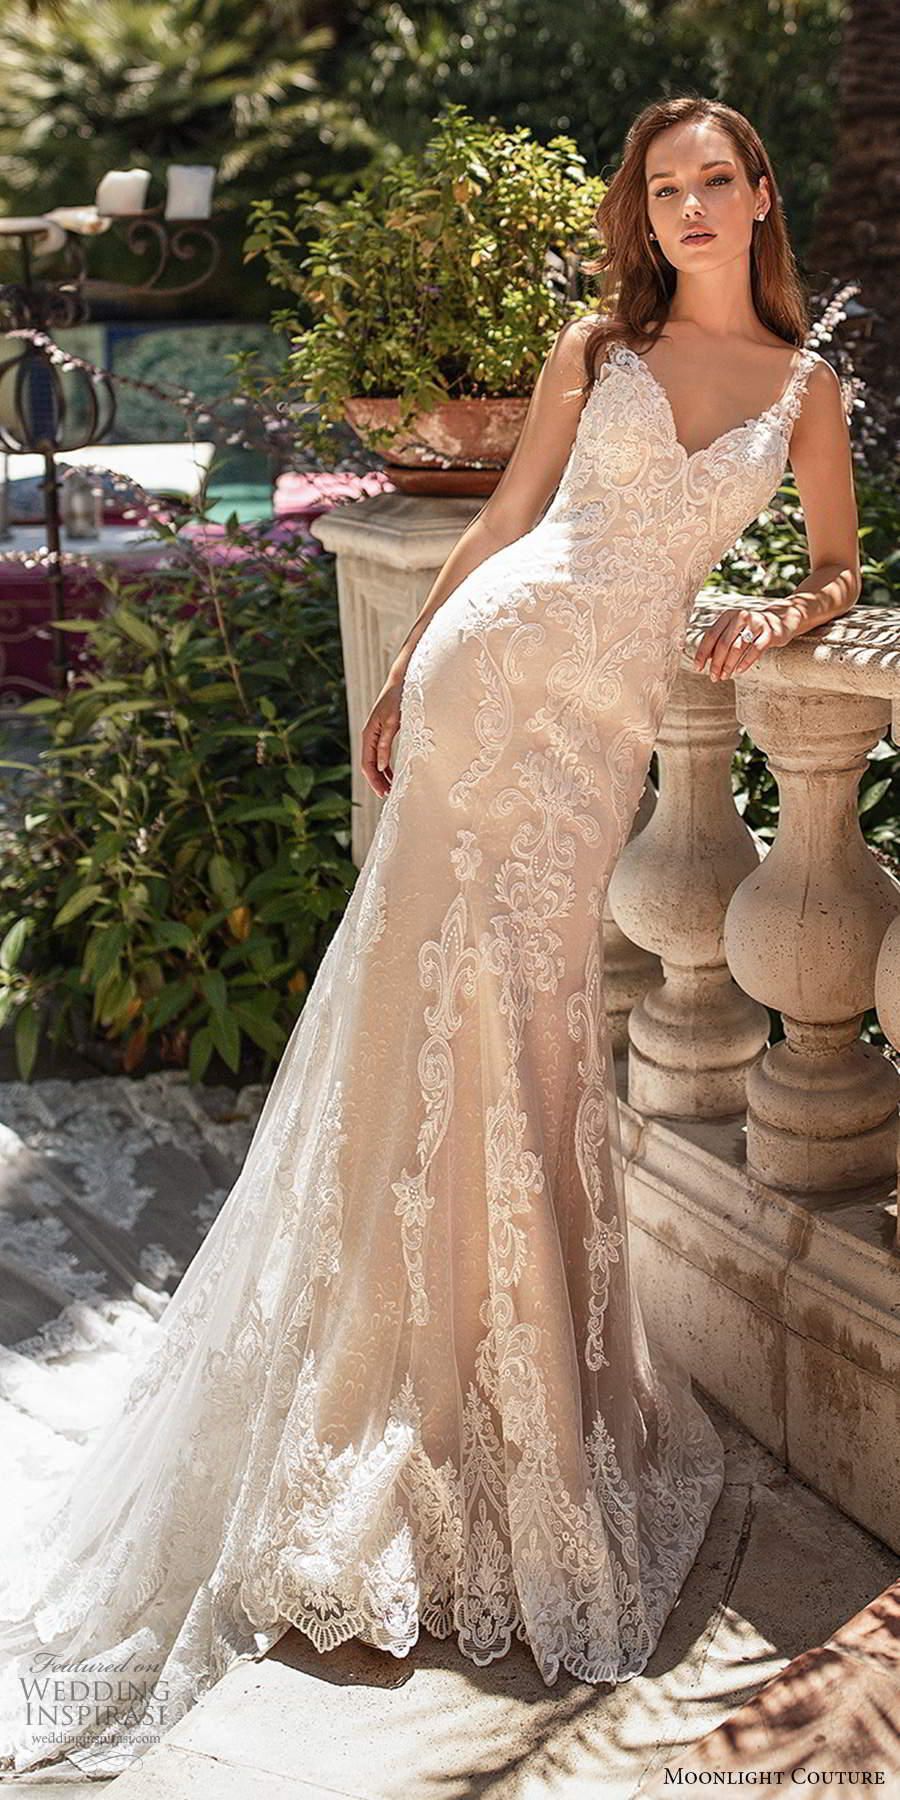 moonlight couture spring 2020 bridal sleeveless illusion straps sweetheart neckline fully embellished lace sheath mermaid wedding dress low back cathedral train (12) mv